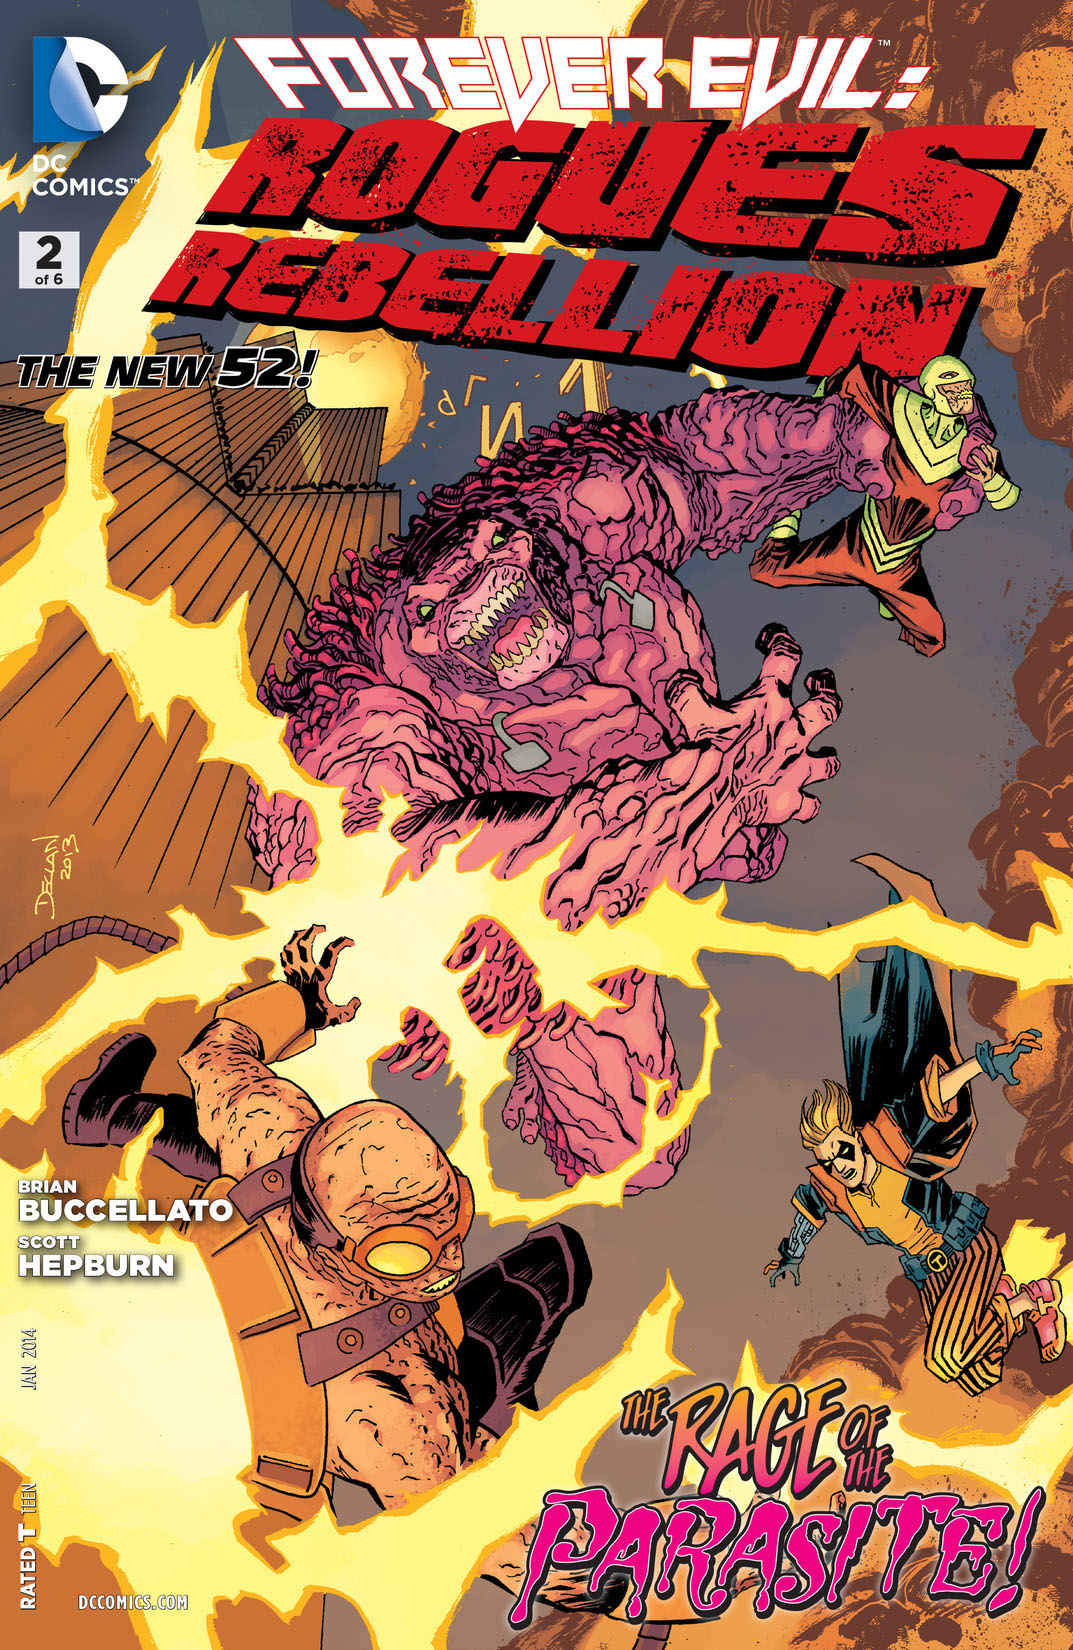 Forever Evil: Rogues Rebellion #2 preview images